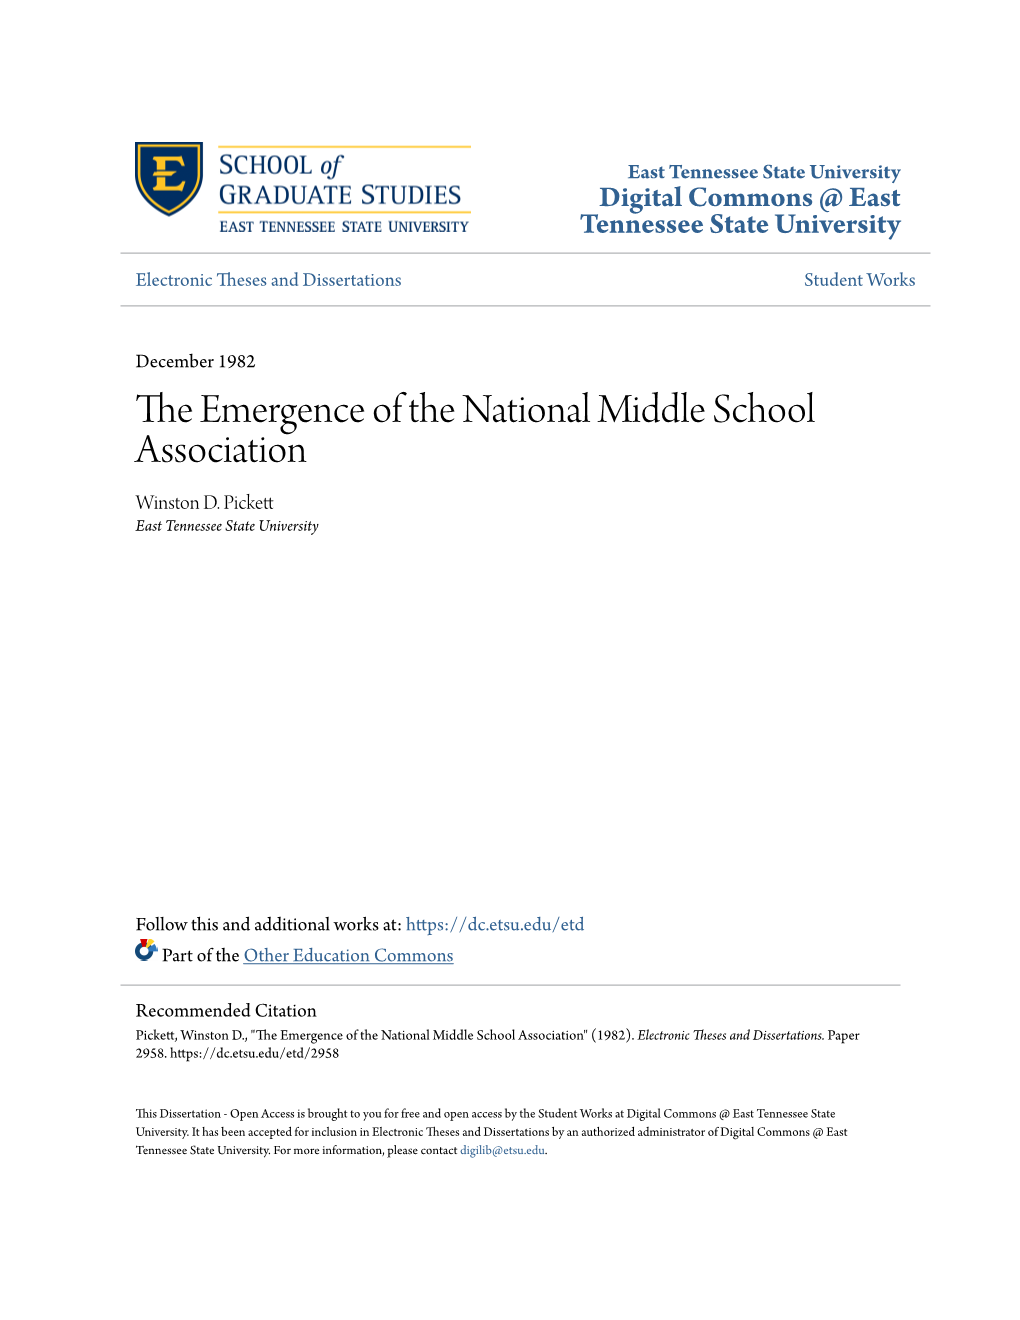 The Emergence of the National Middle School Association